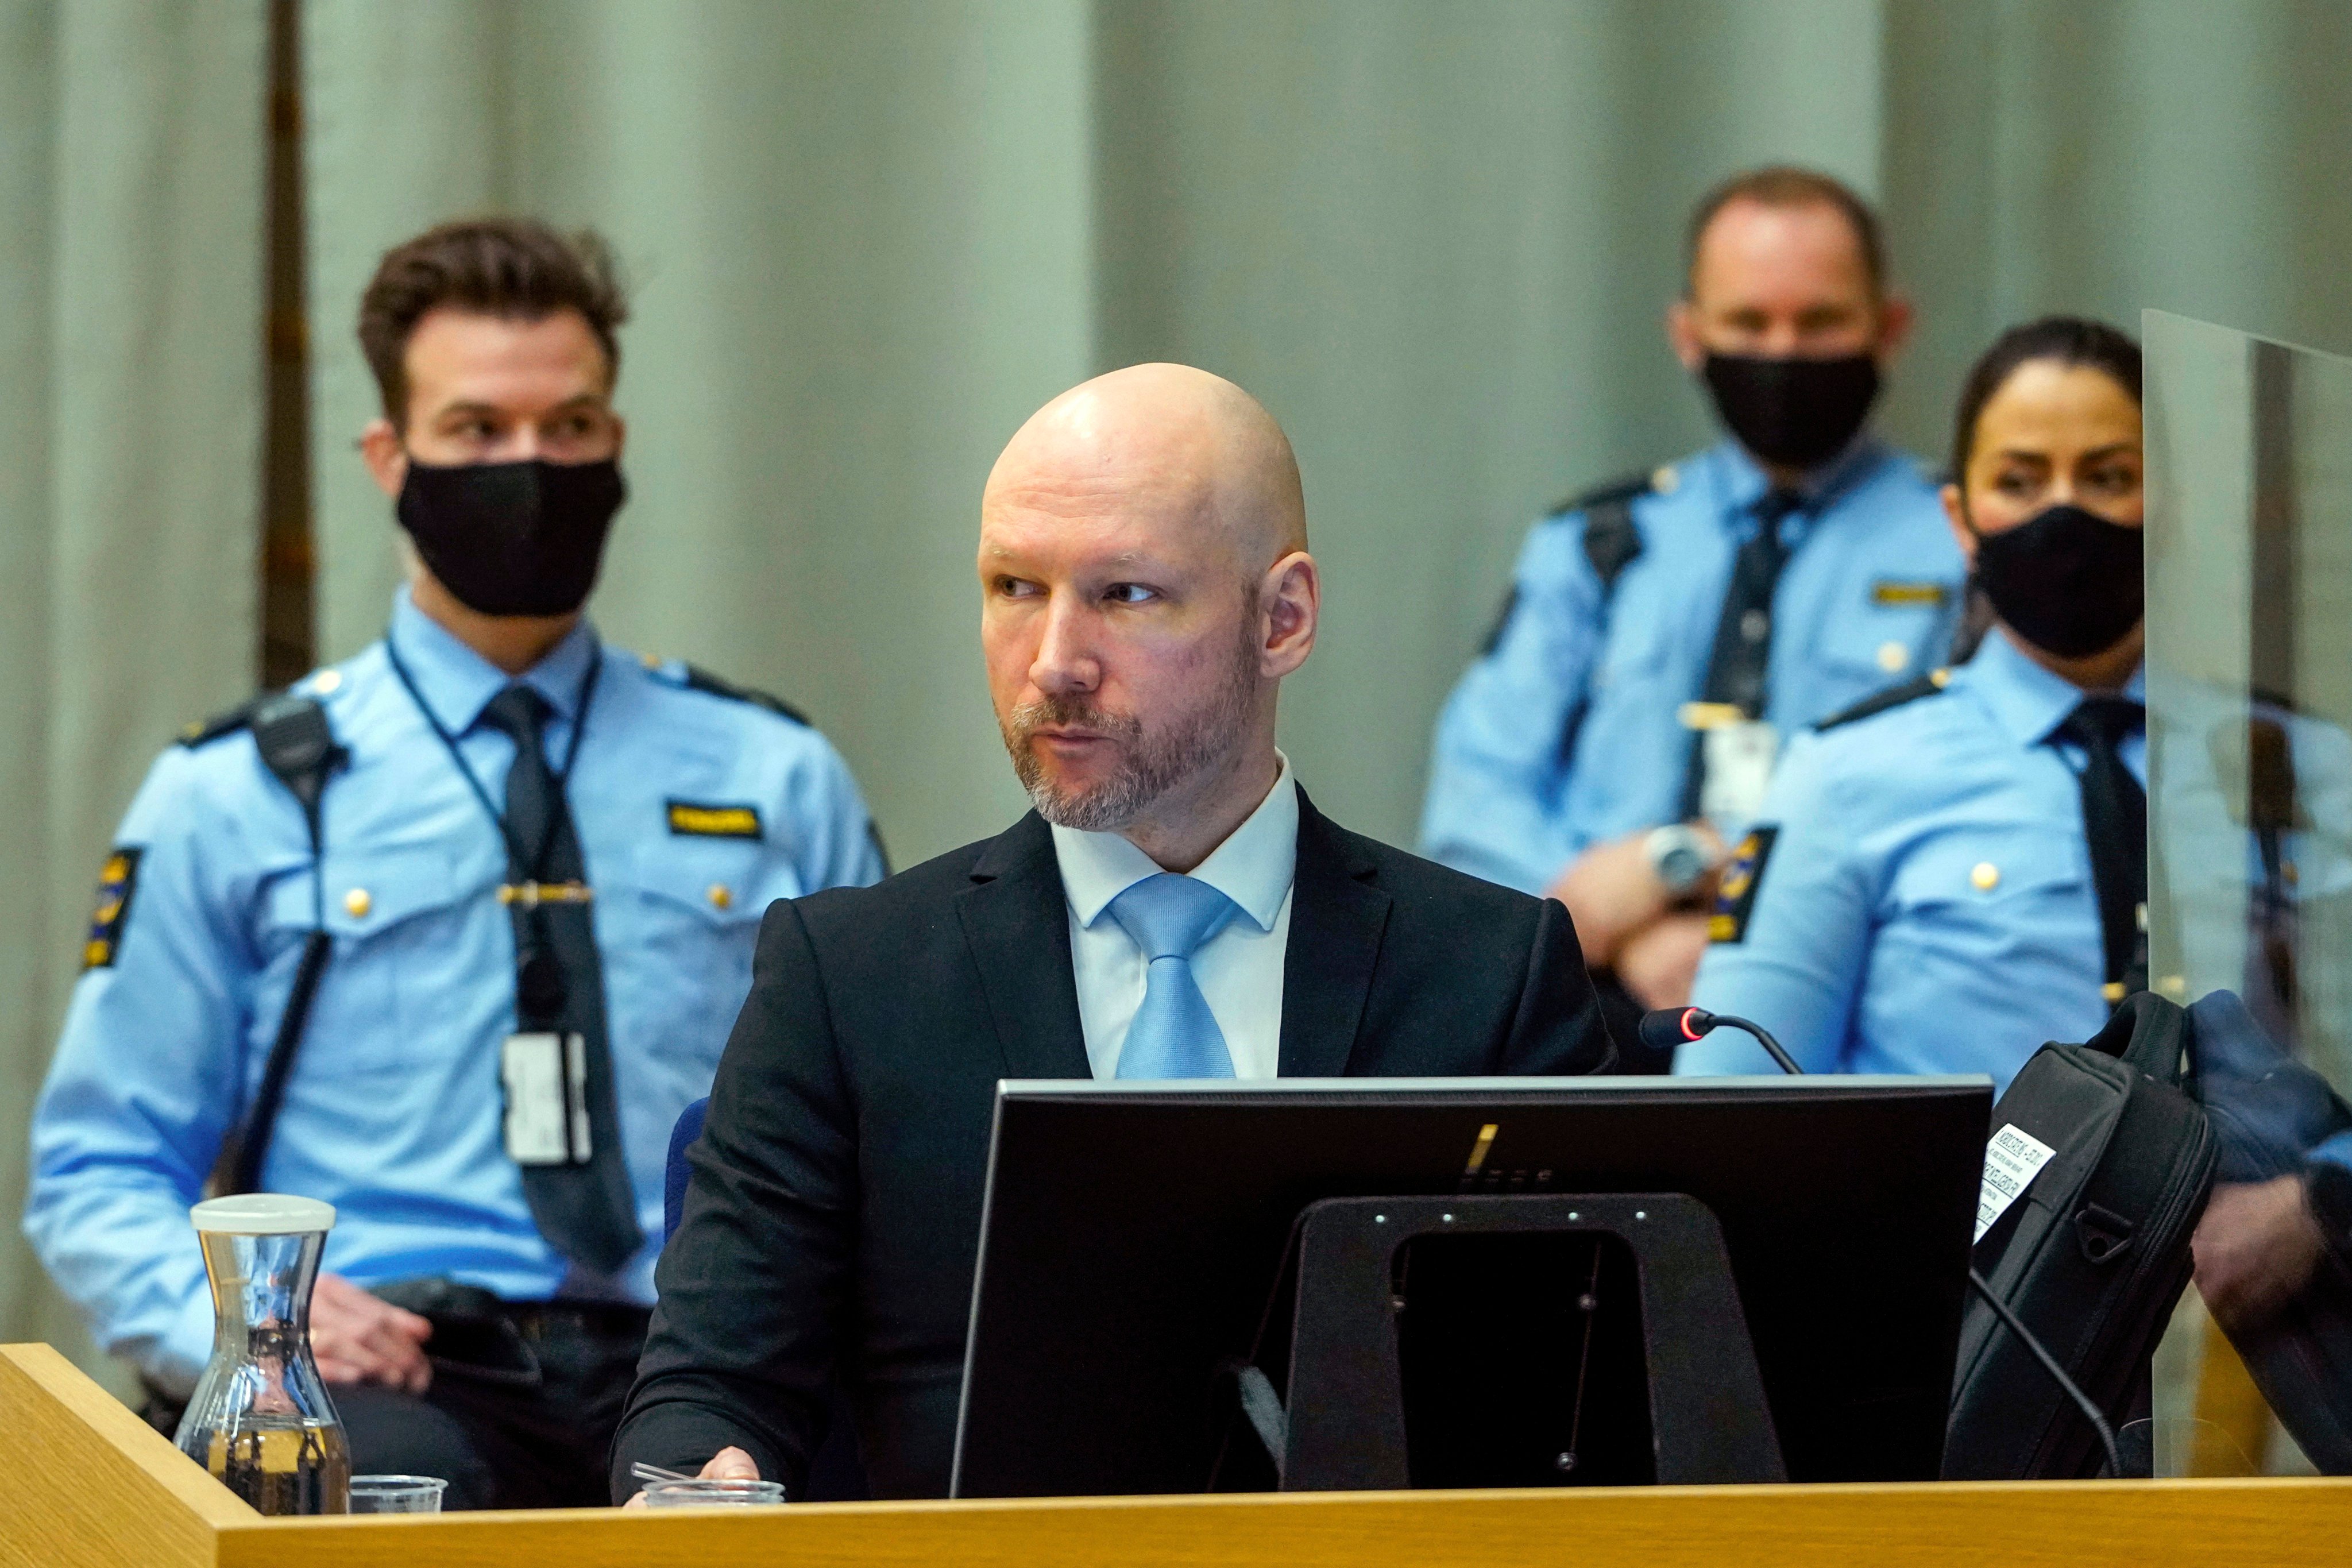 Convicted mass murderer Anders Behring Breivik sits in the makeshift courtroom in Skien prison in January 2022. Photo: NTB Scanpix via AP